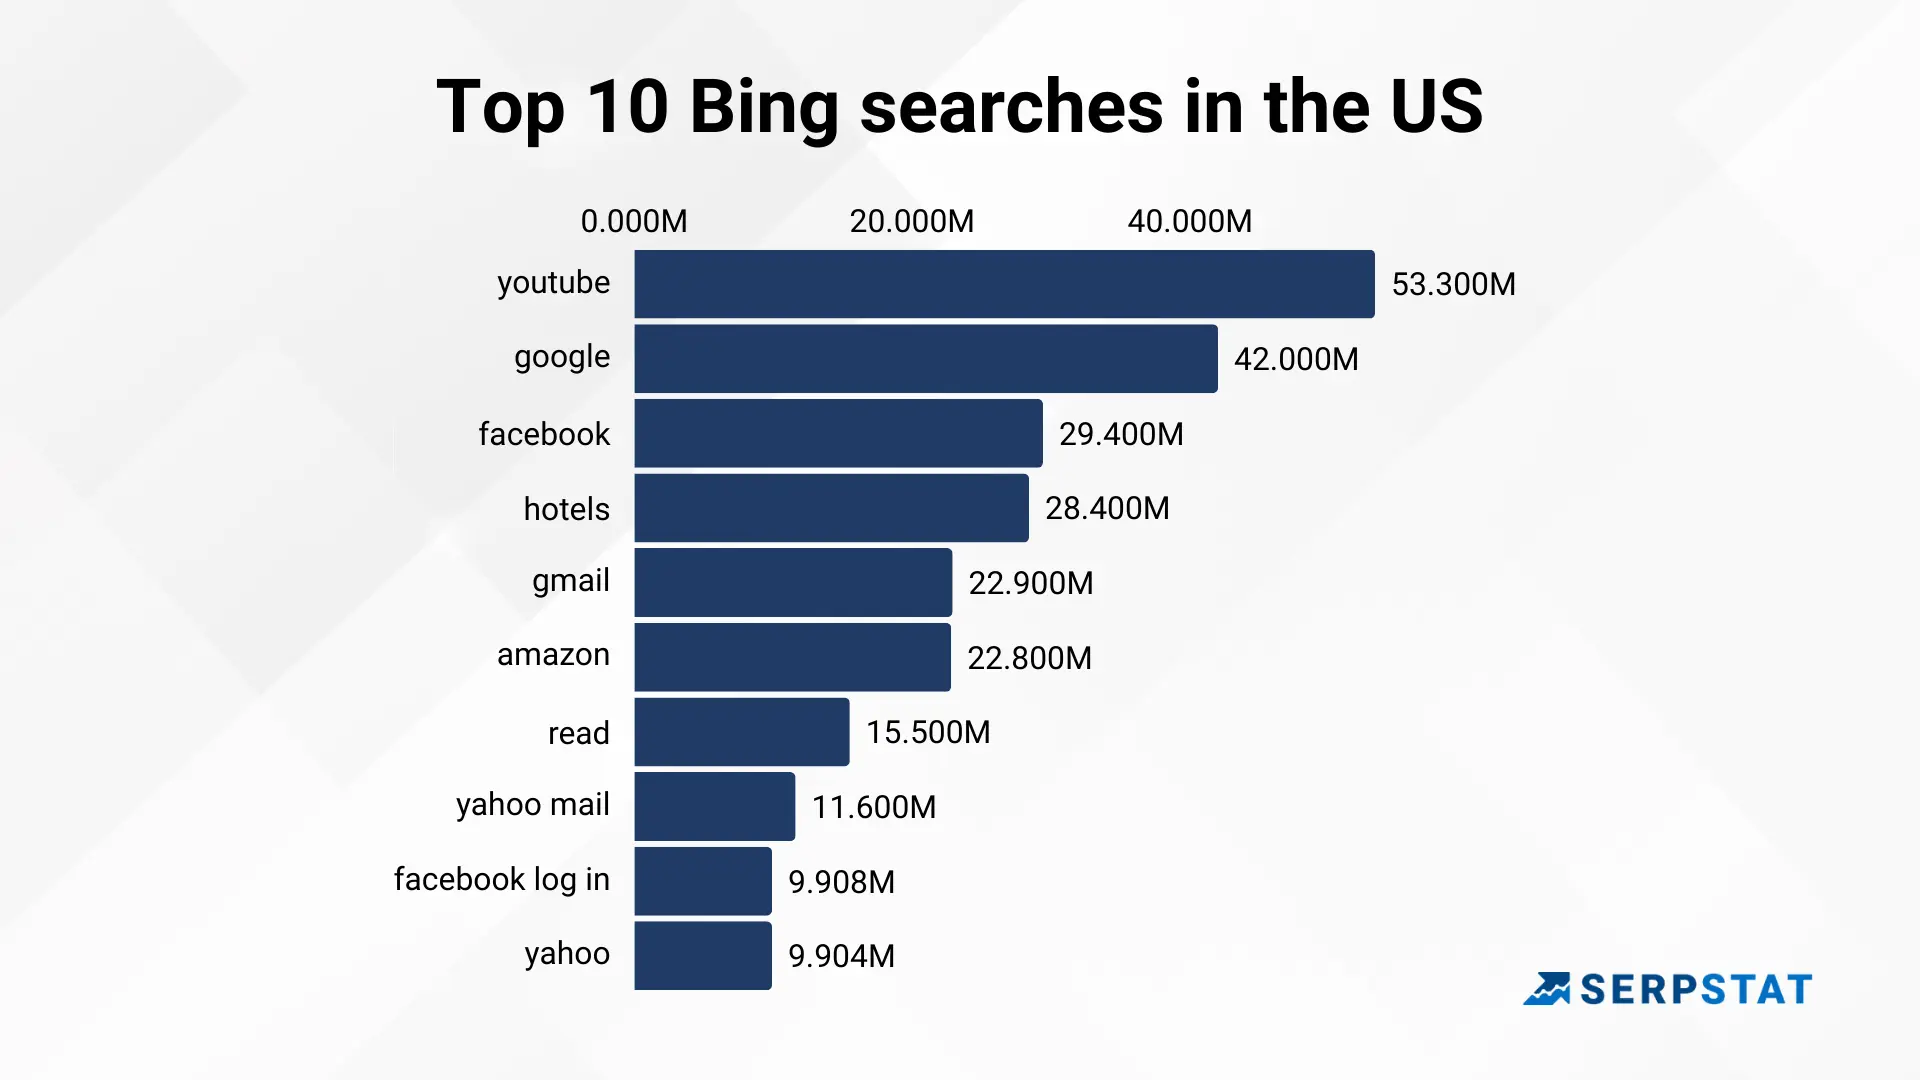 Top 10 Bing searches